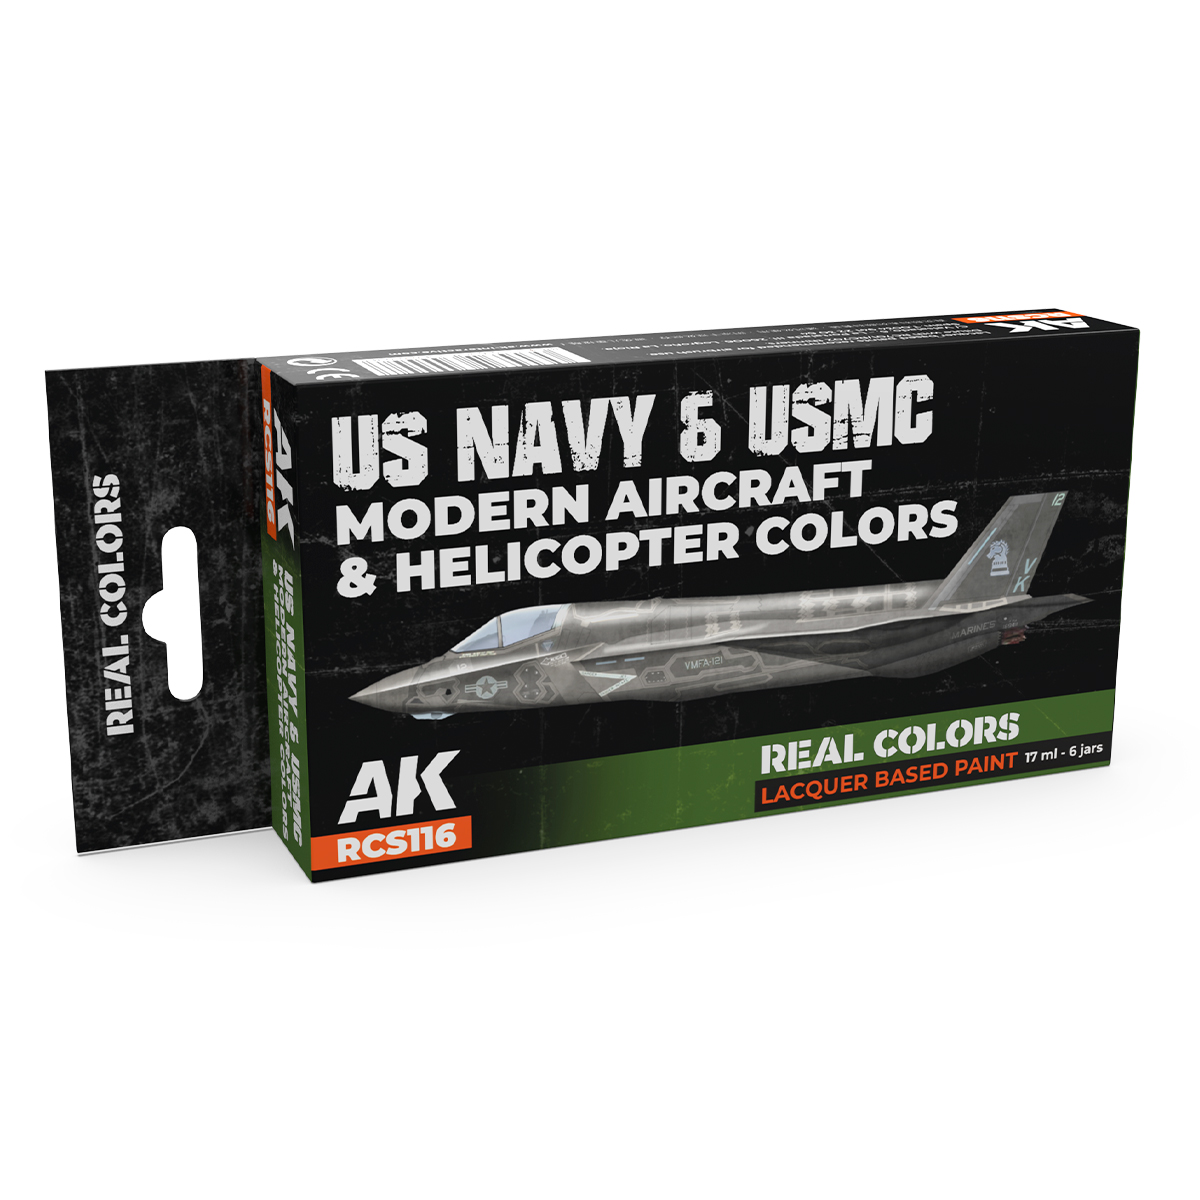 US Navy & USMC Modern Aircraft & Helicopter Colors